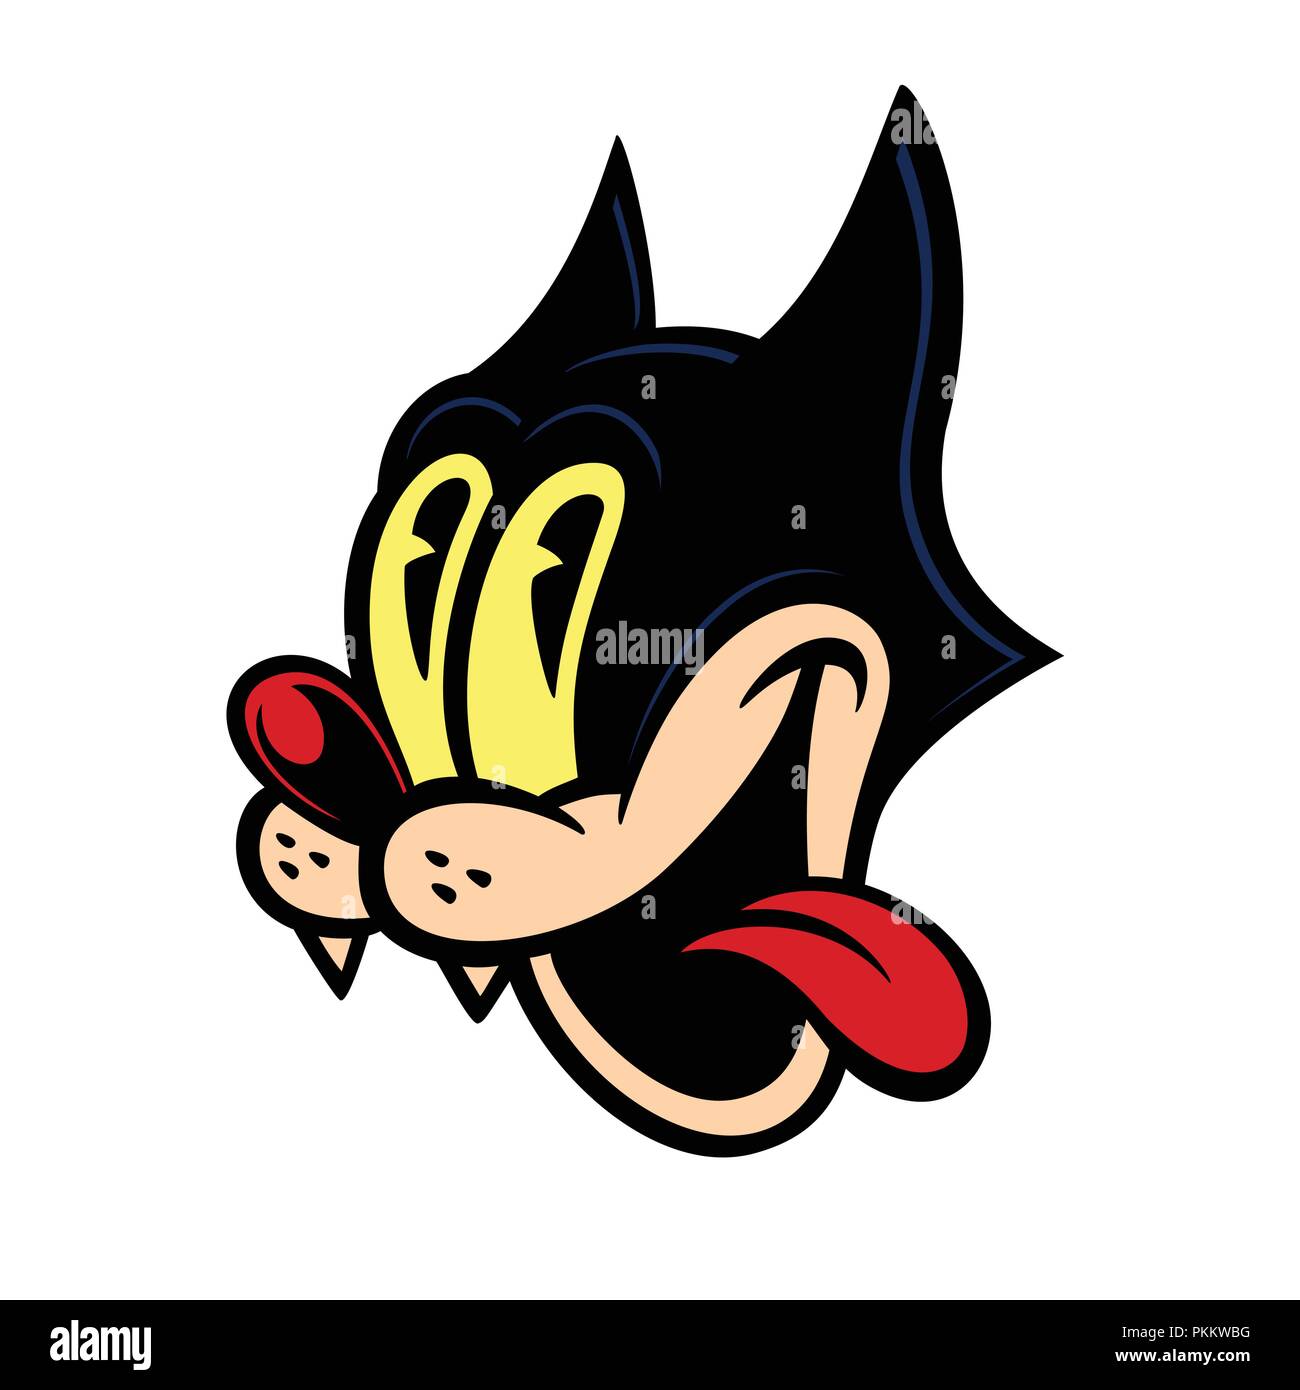 Vintage Toons: 30s style vintage cartoon character crazy cat smiling with tongue out Stock Vector